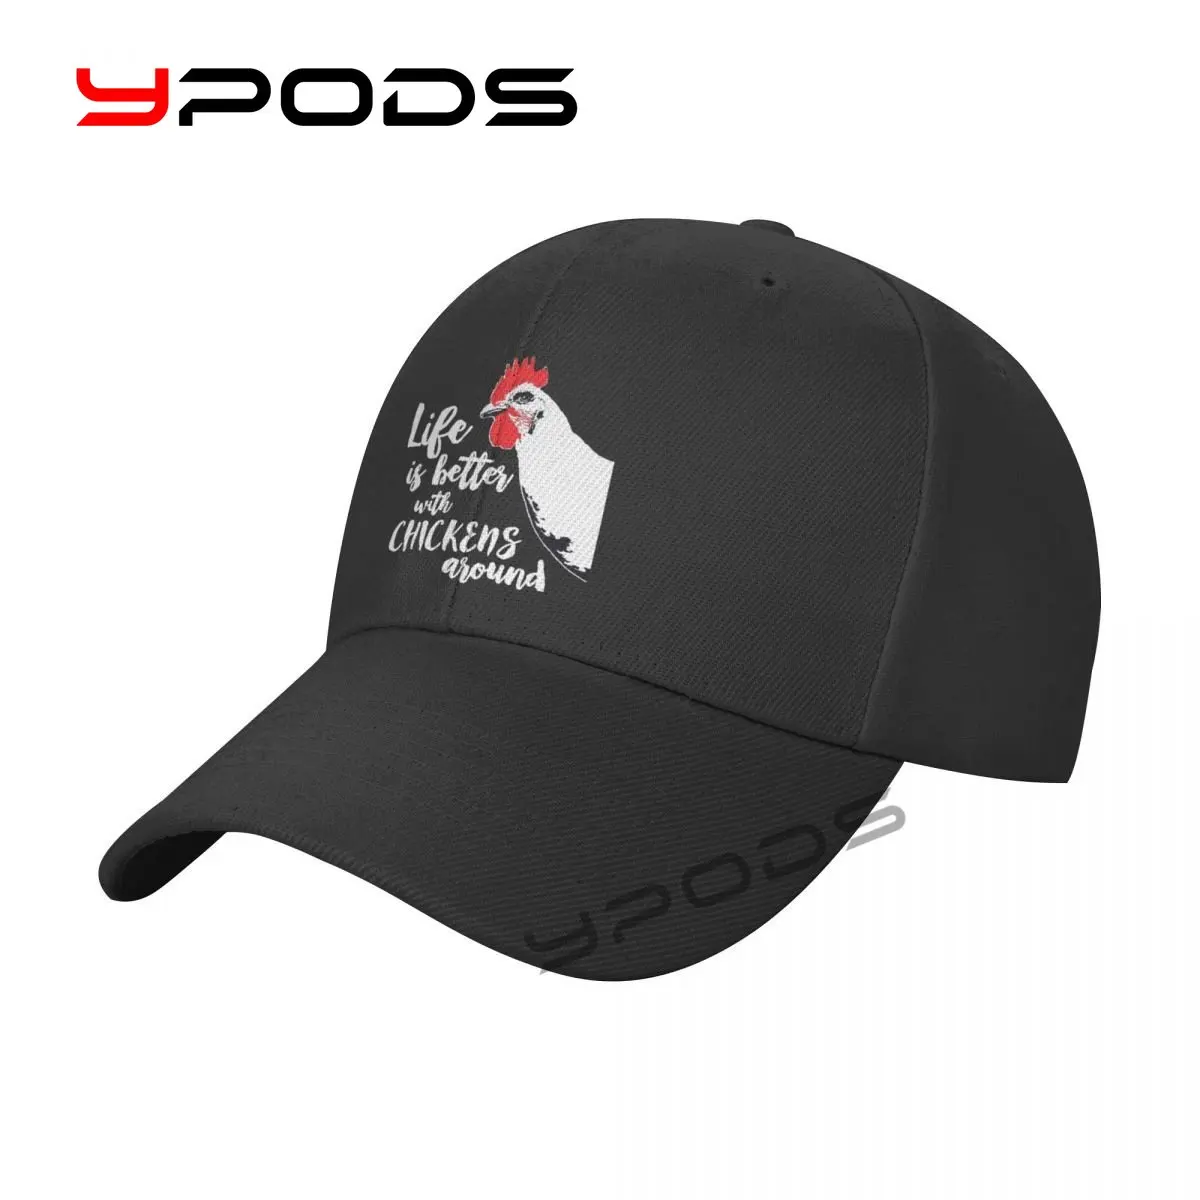 

Plain Solid Color Baseball Caps Life Is Better With Chickens Around Multicolor Men Women Visor Hat Adjustable Casual Sports Hats